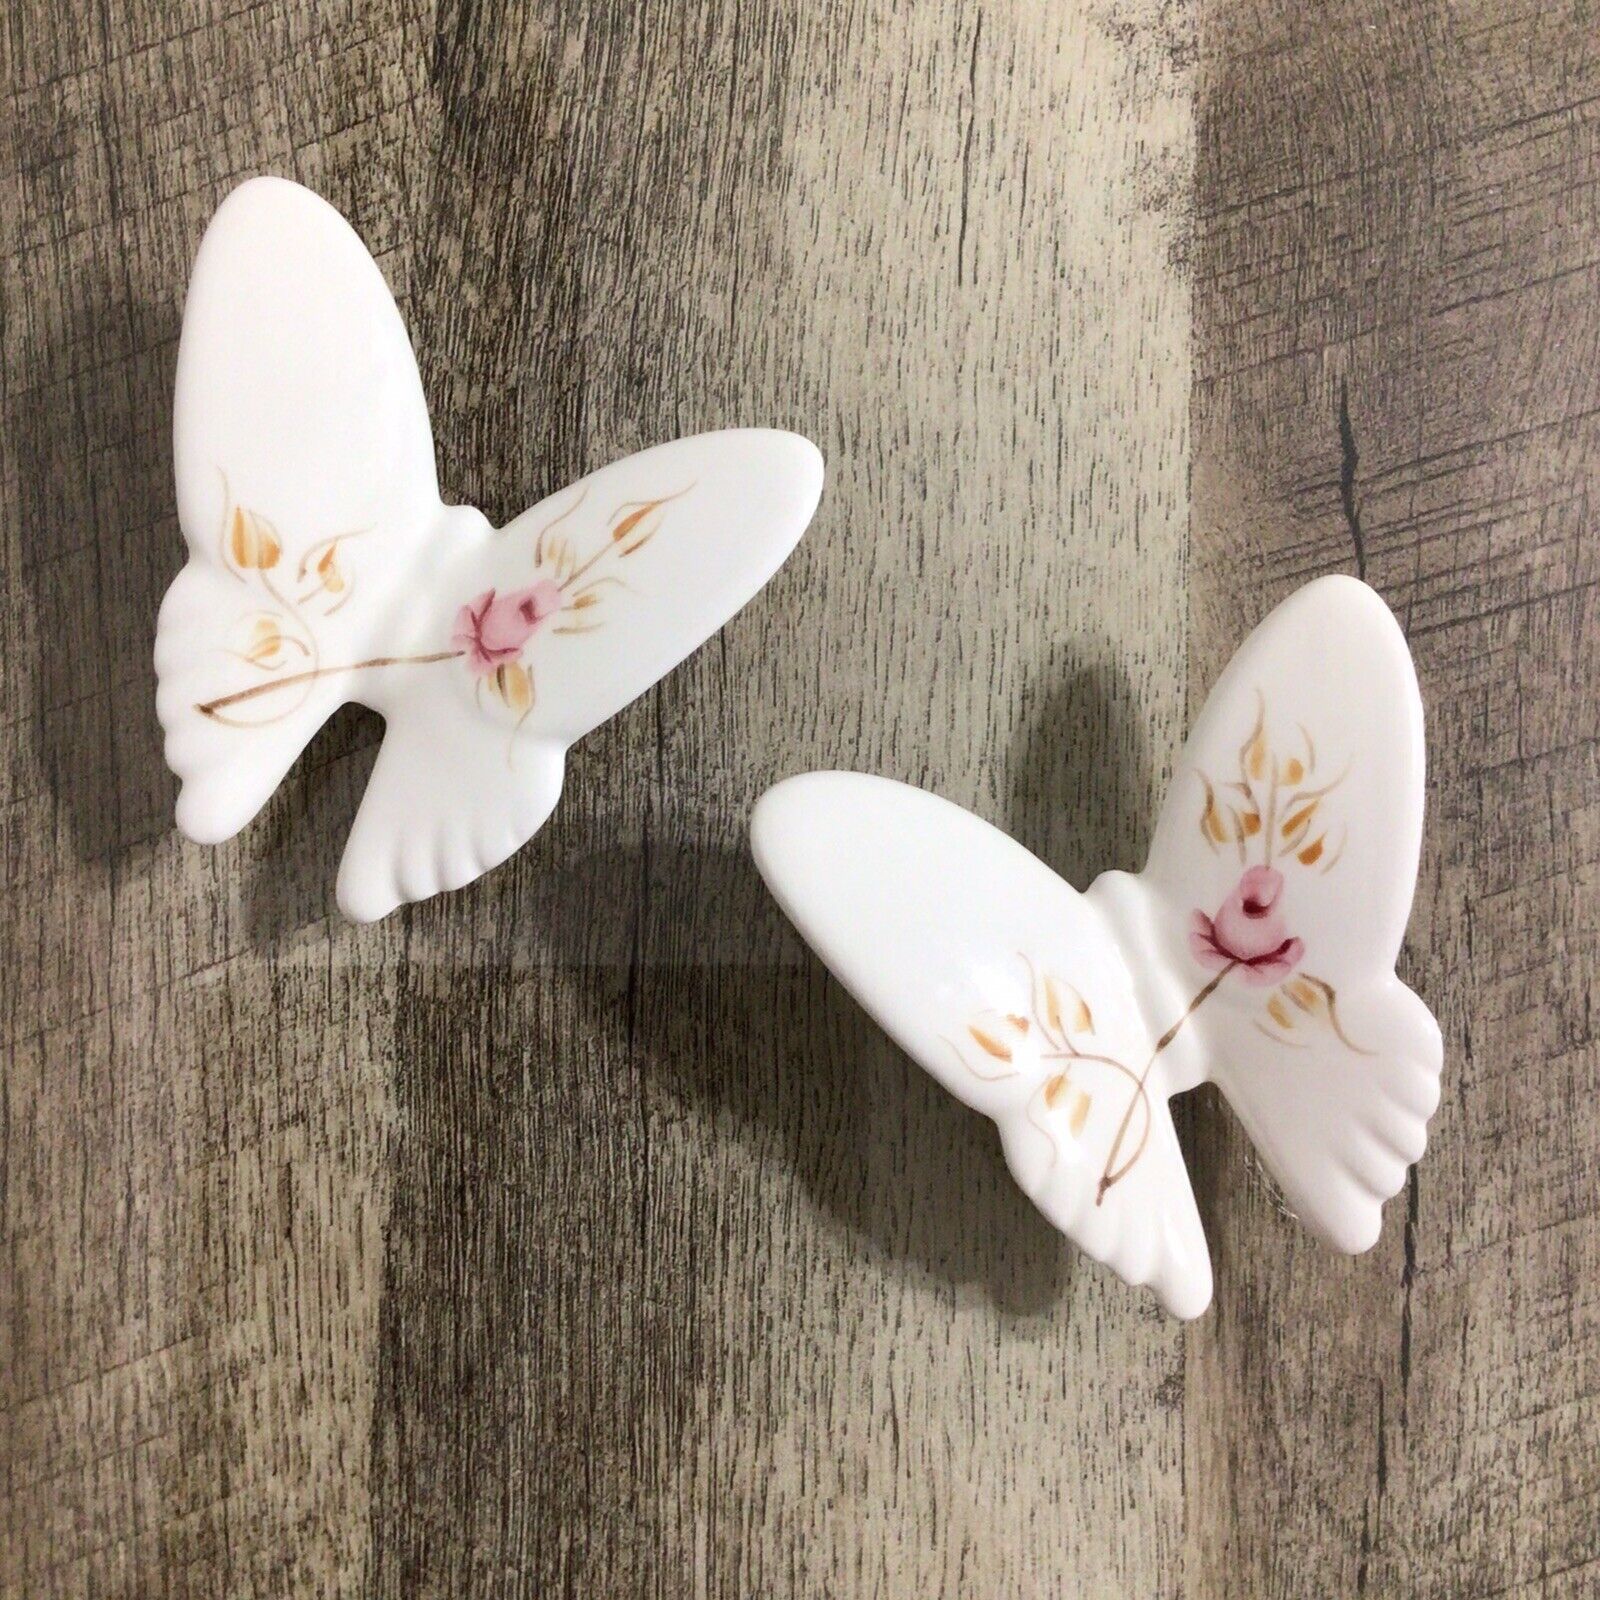 Vintage Wall Hanging Butterflies HOMECO Lasting Products Set Of 2 Porcelain